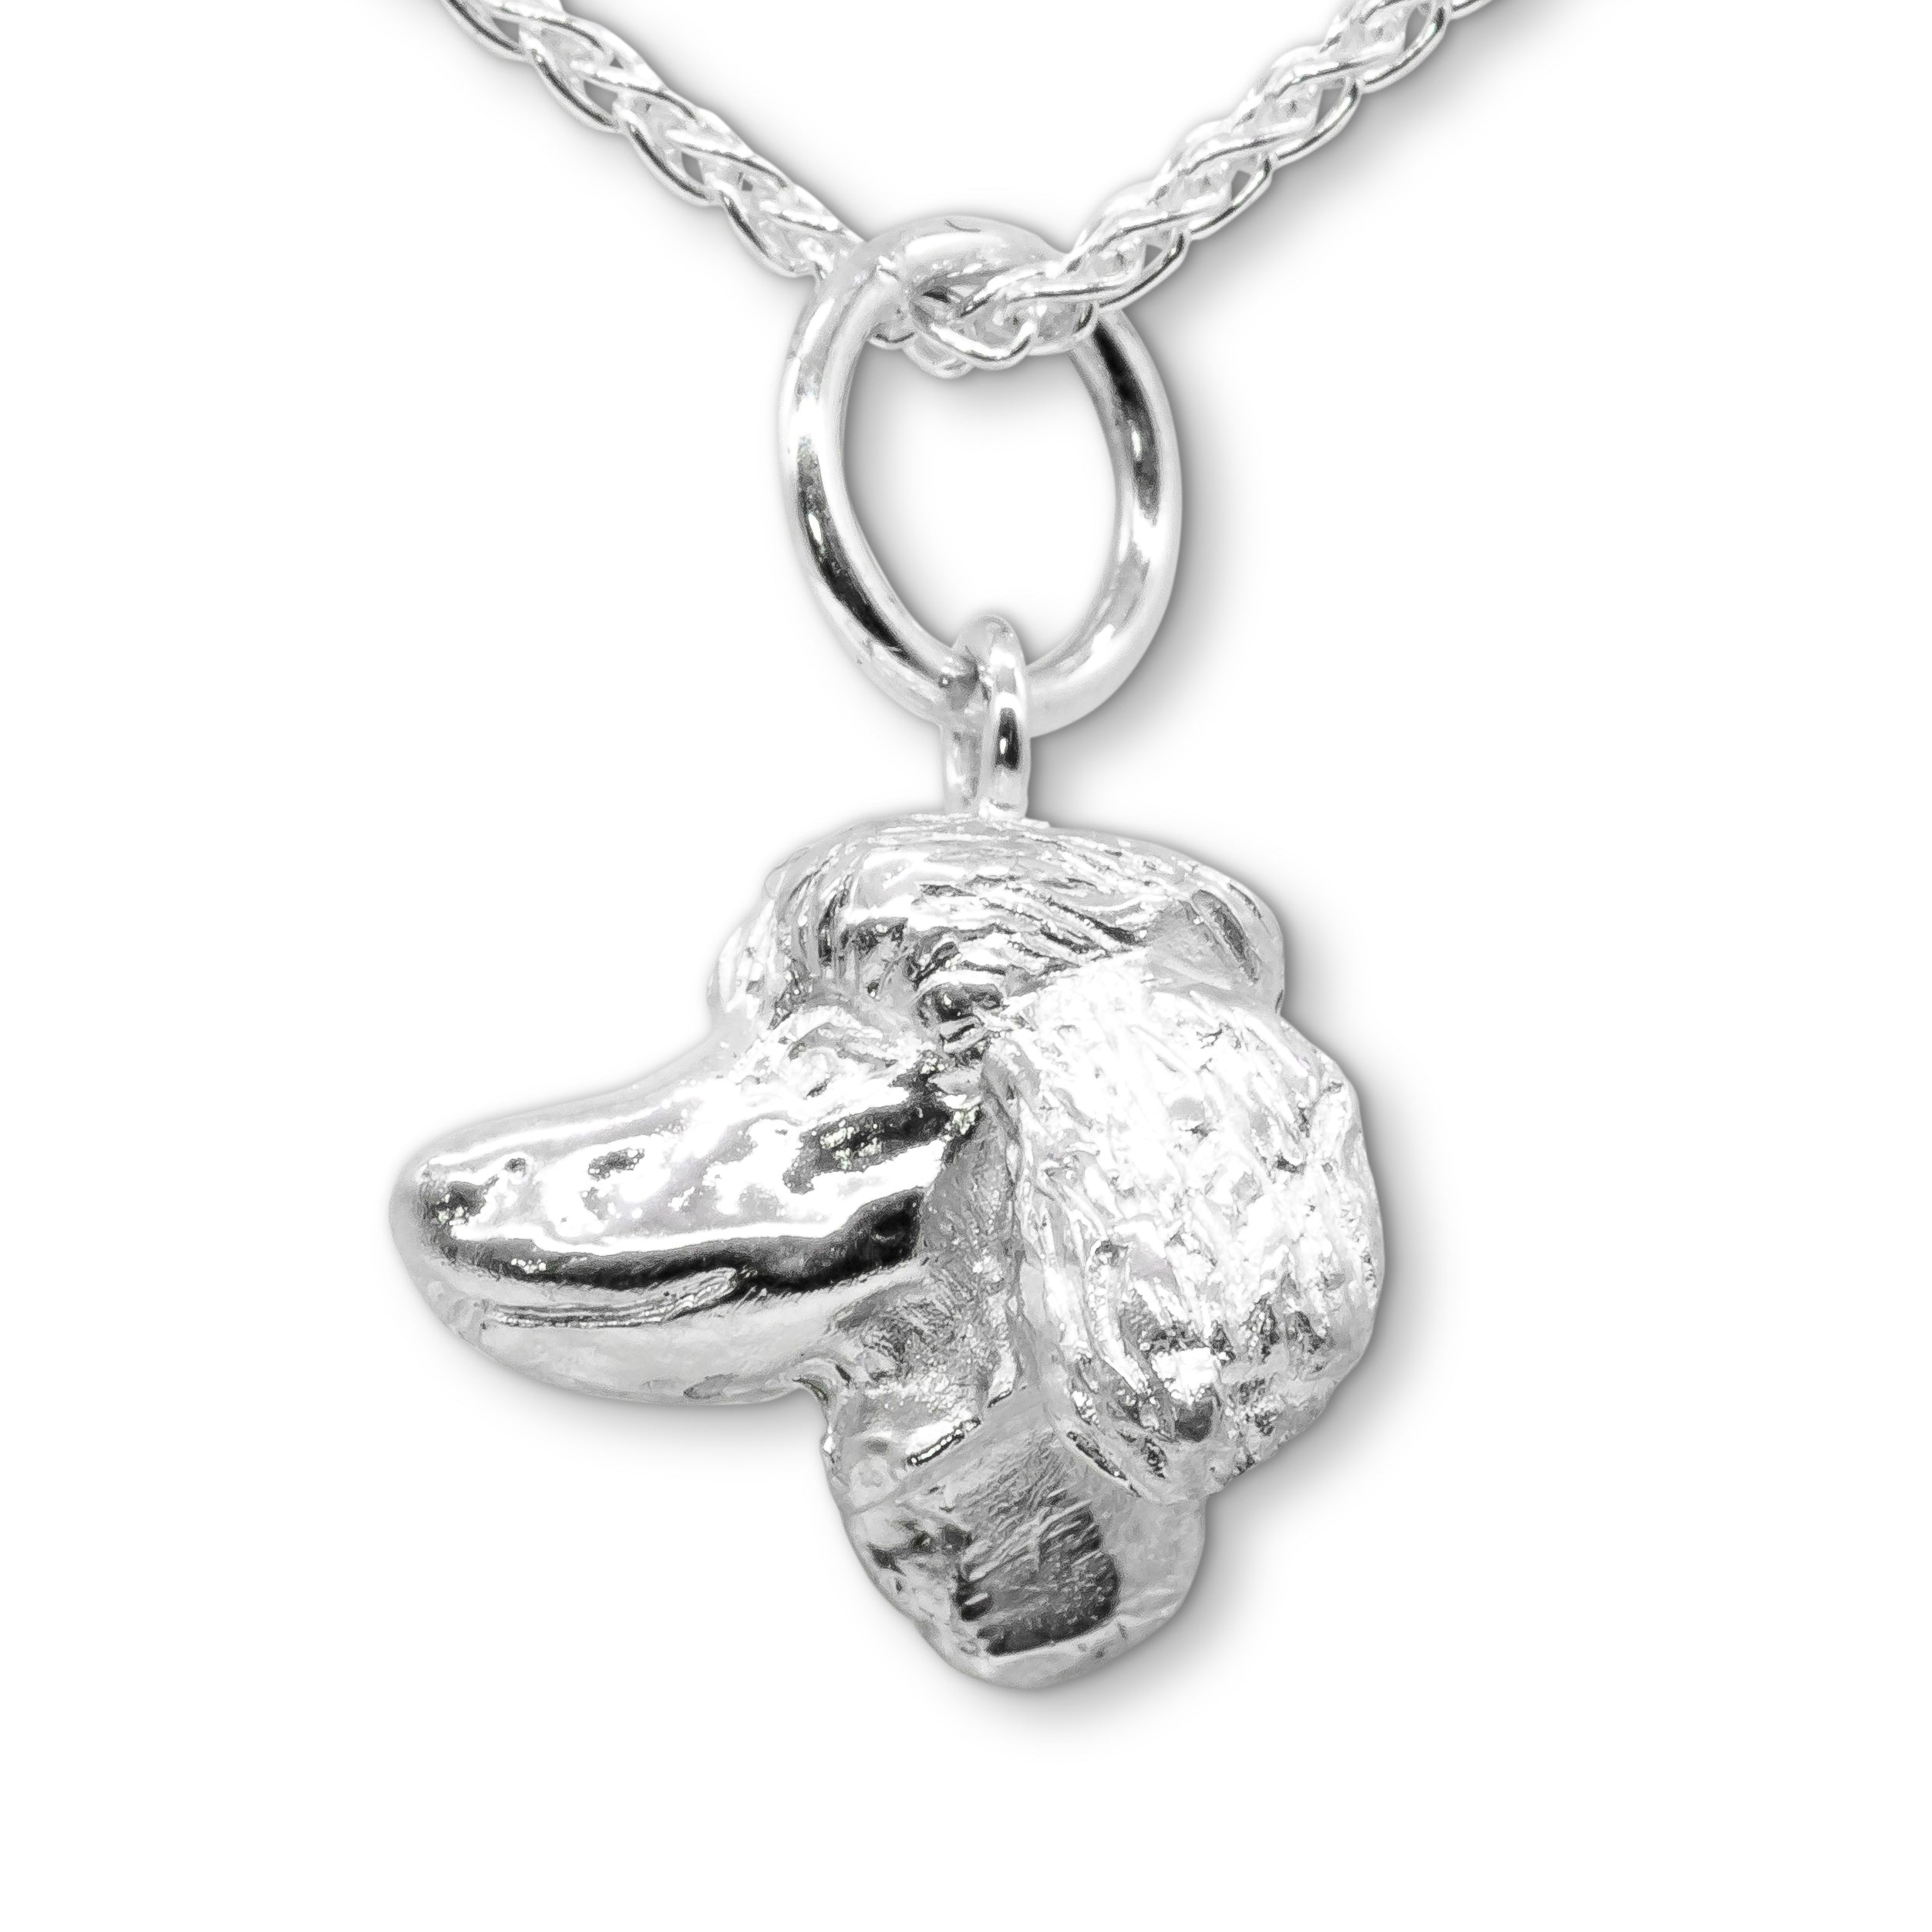 Poodle Charm or Pendant by Paul Eaton